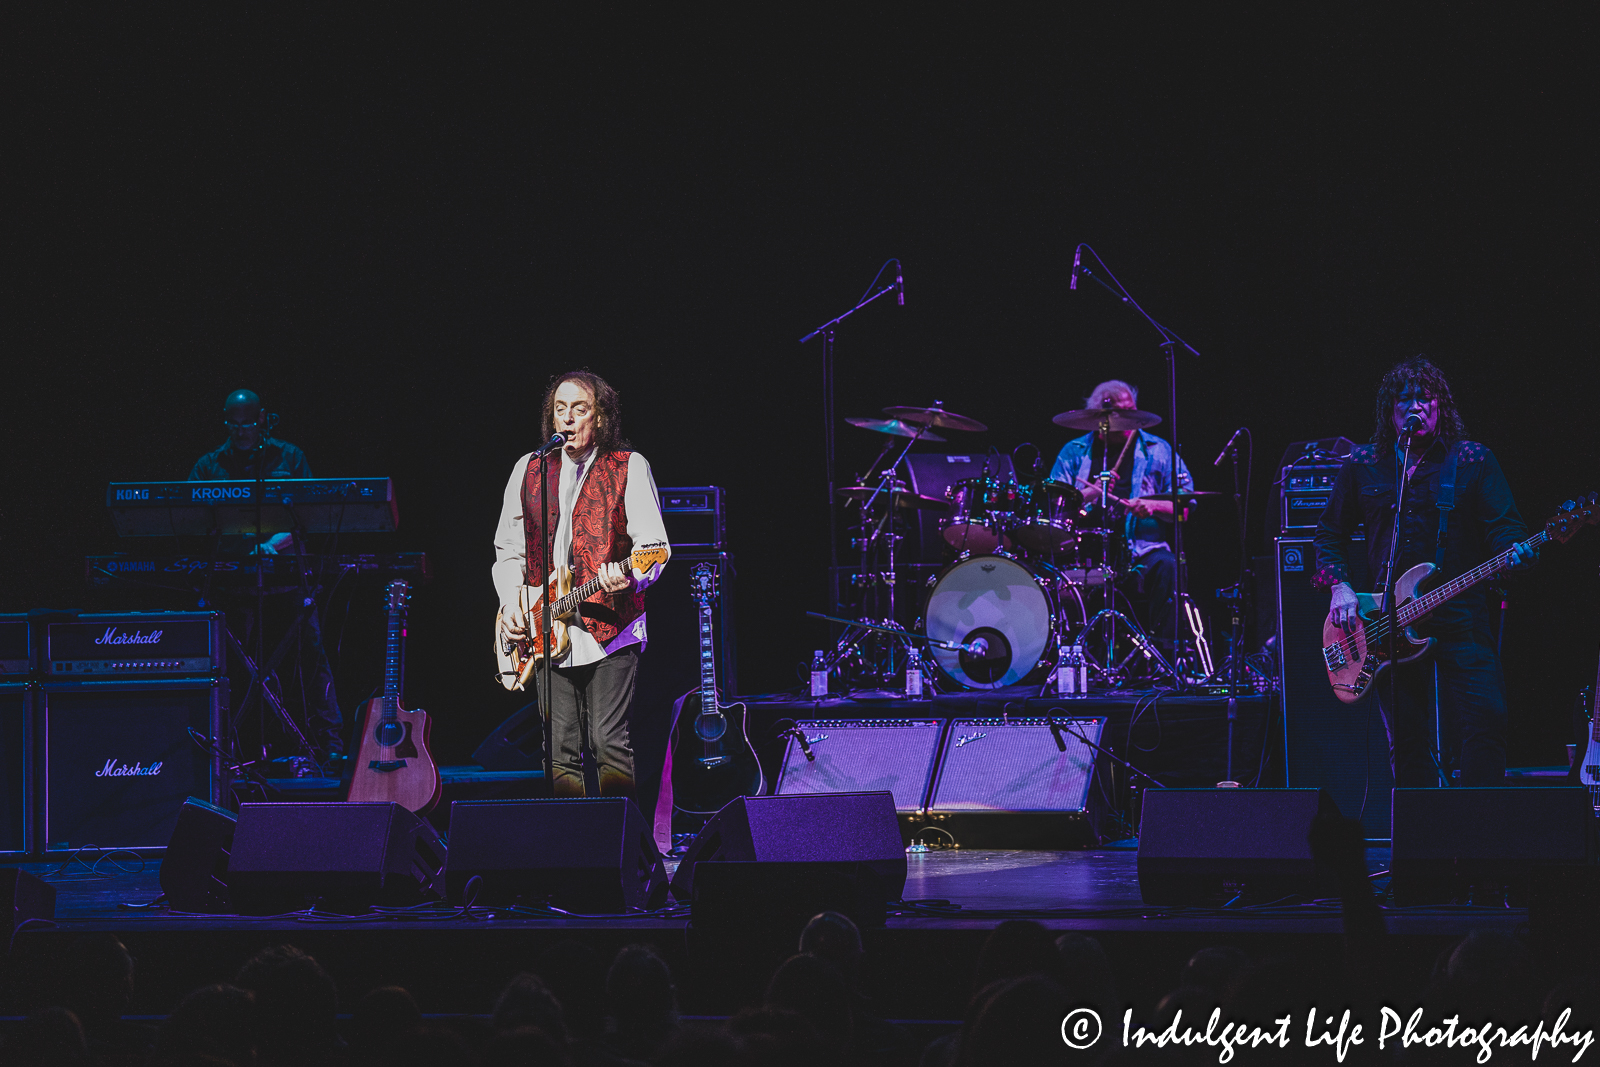 Tommy James & The Shondells live in concert inside Kauffman Center's Muriel Kauffman Theatre in downtown Kansas City, MO on April 1, 2023.